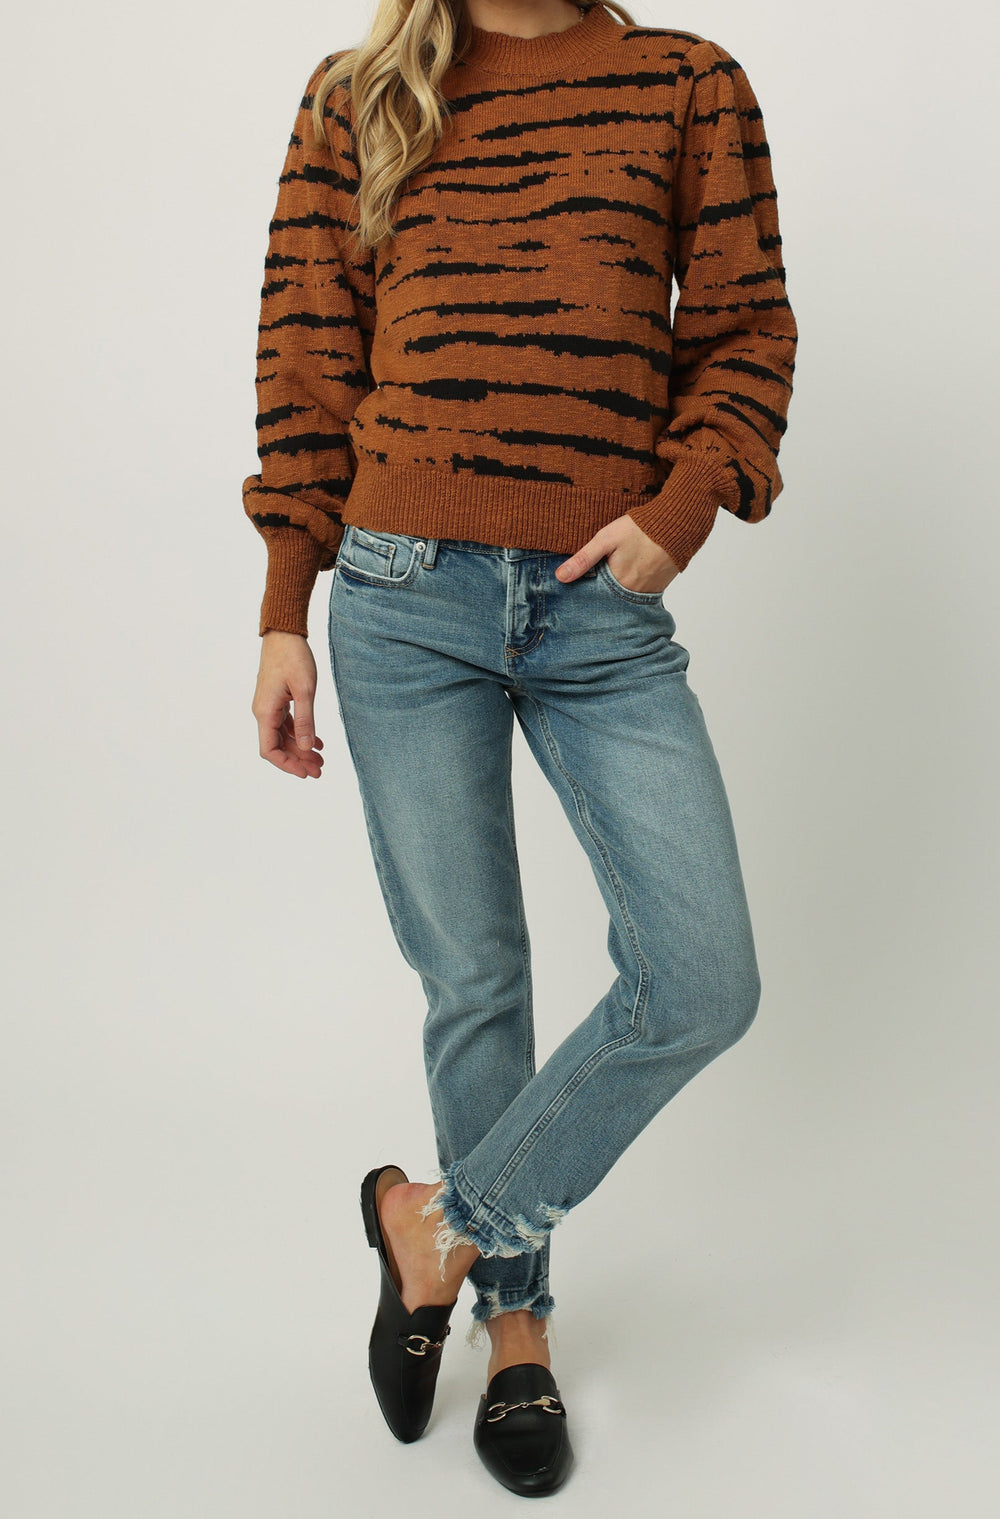 image of a female model wearing a JASMINE LONG SLEEVE SWEATER TIGER SWEATERS